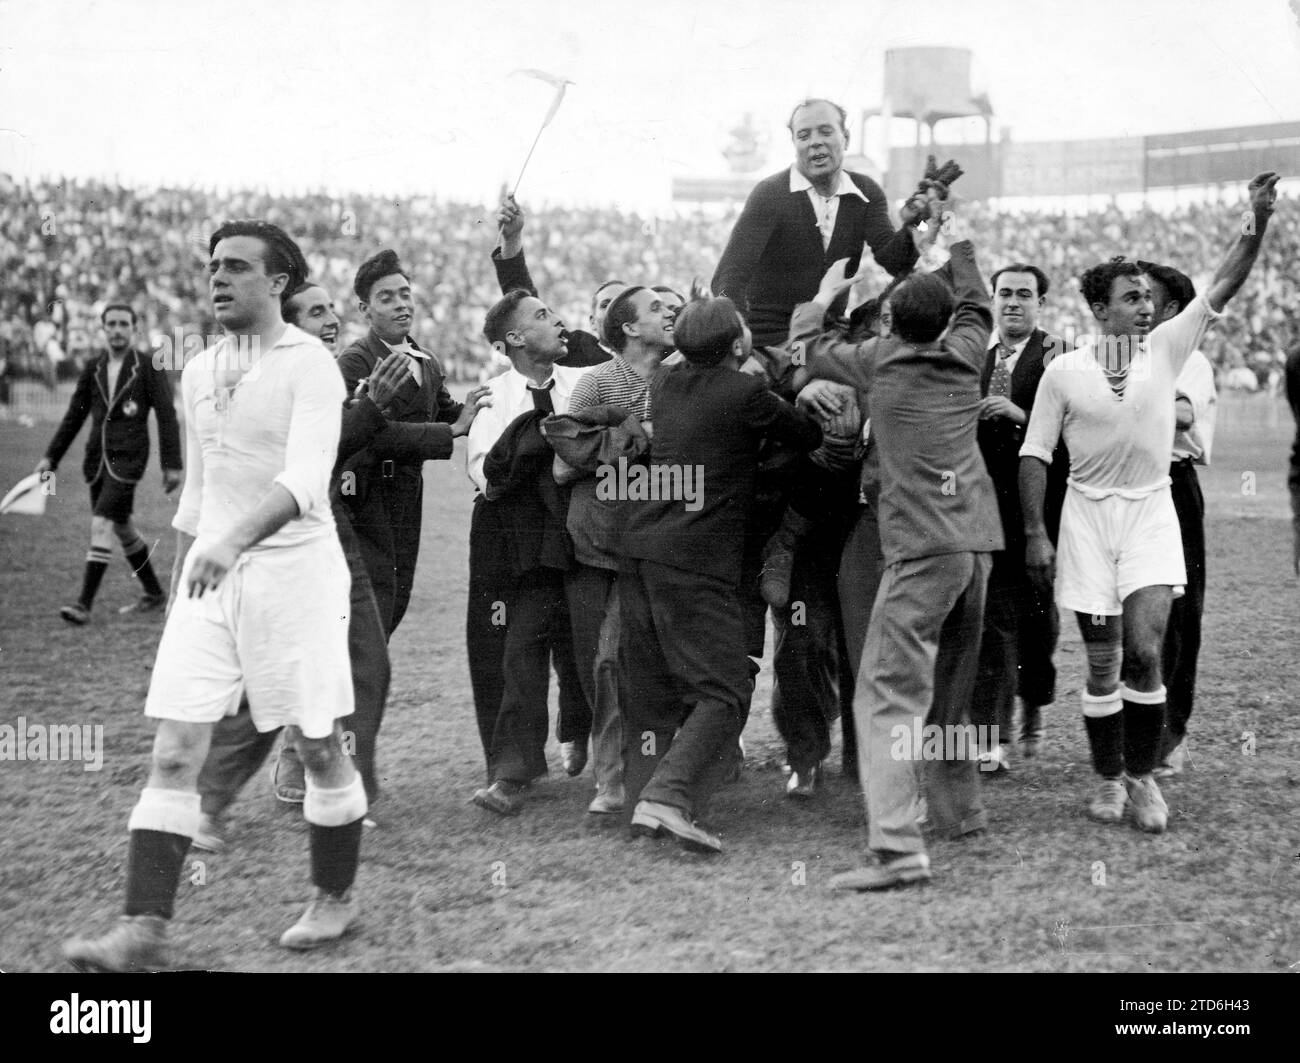 Final of the Spanish championship (1936) Madrid FC 2 - FCBarcelona 1. Zamora Comes Out On Shoulders. Credit: Album / Archivo ABC Stock Photo